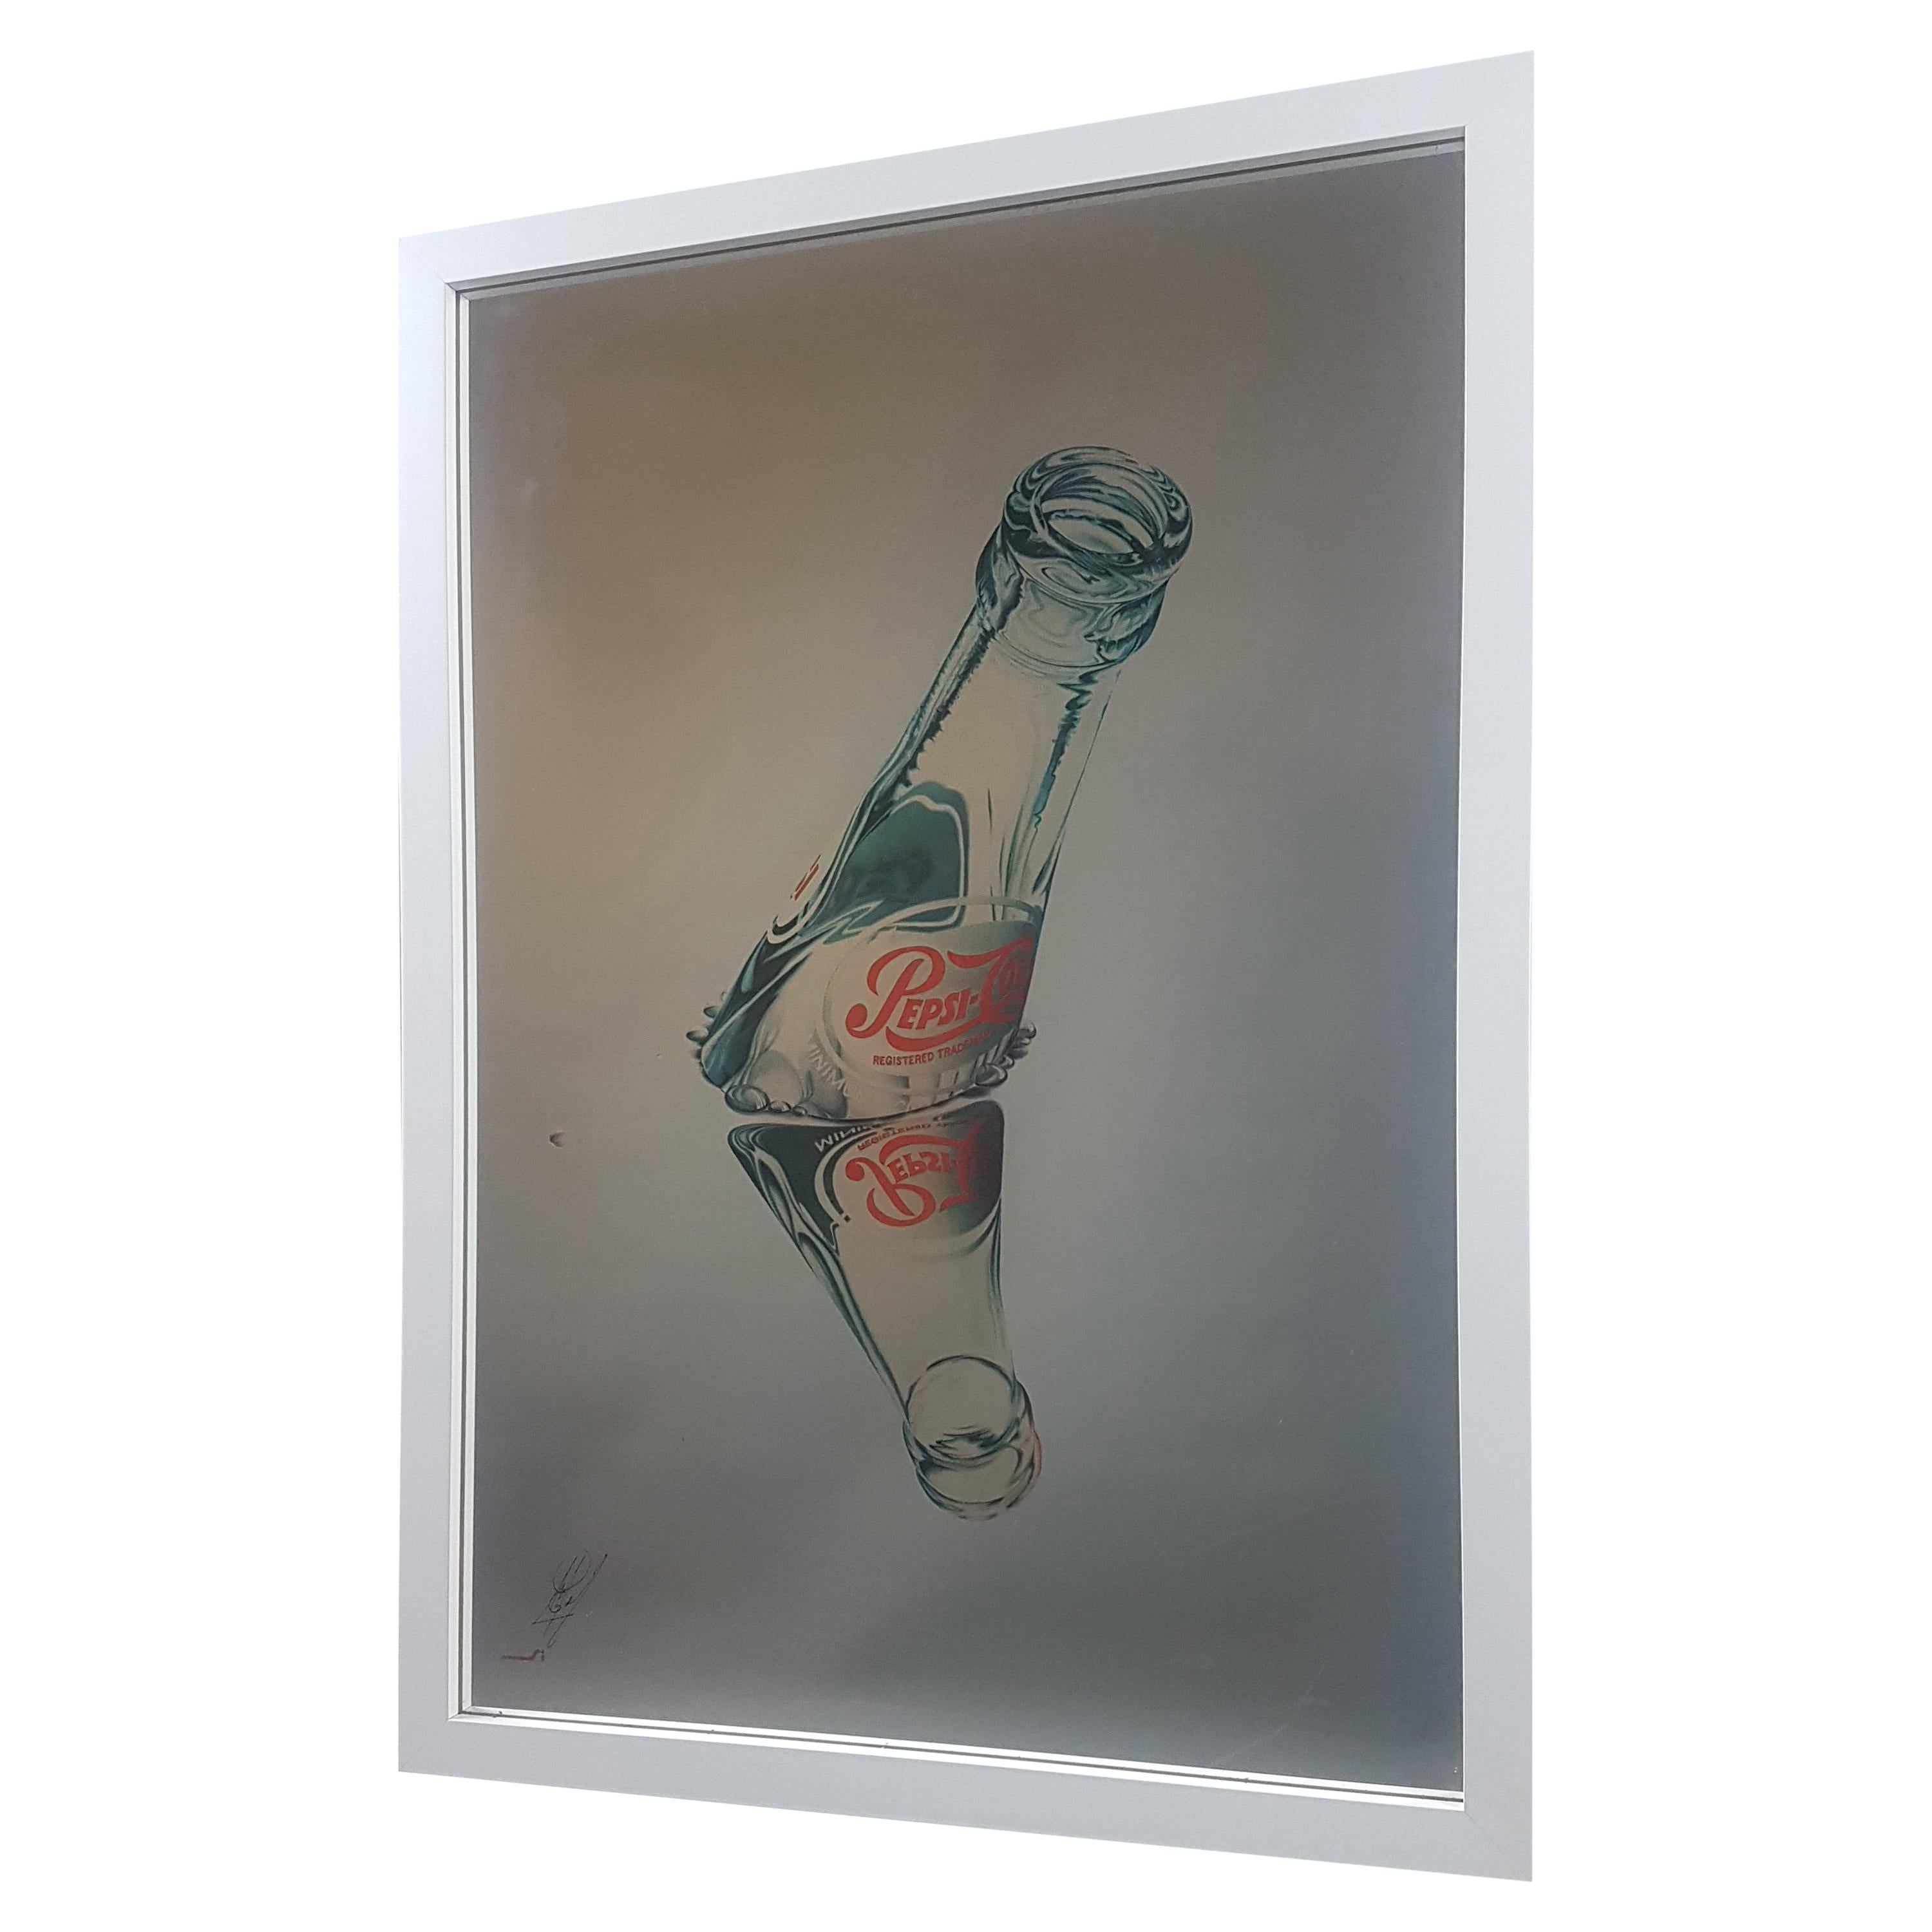 Original Pepsi Cola Reverse Printed Advertising Mirror Signed by the Artist For Sale